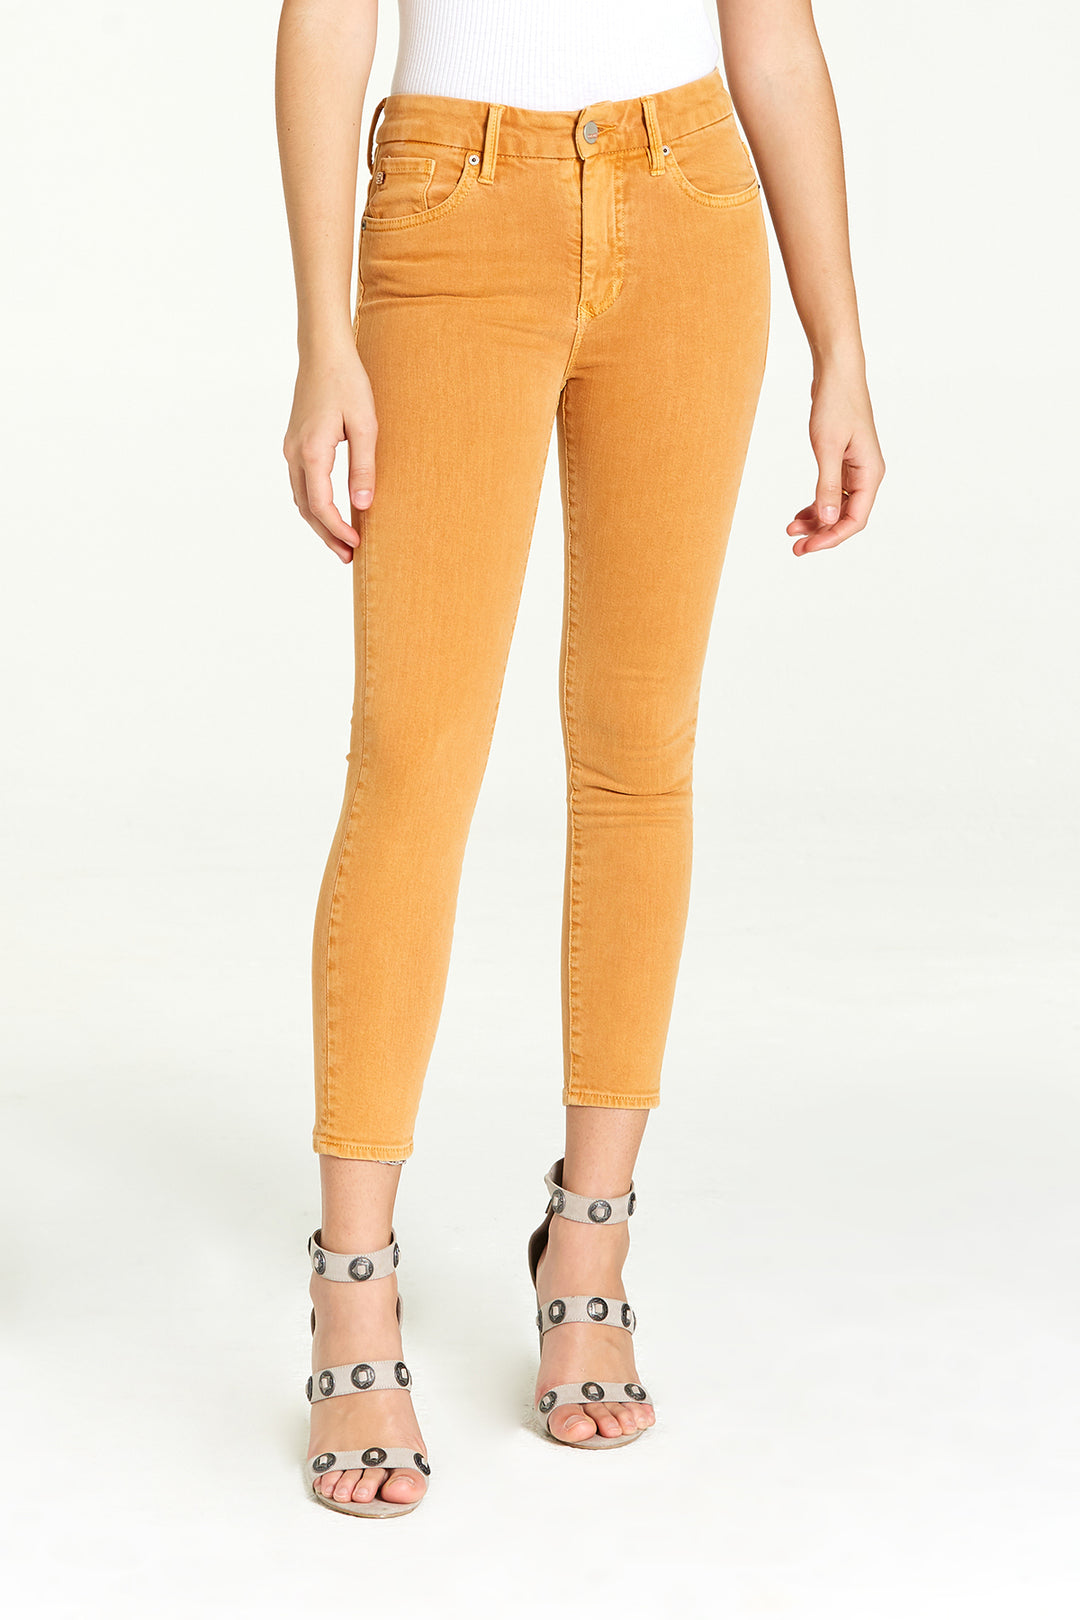 image of a female model wearing a 10" PIXIE SKINNY MIMOSA JEANS